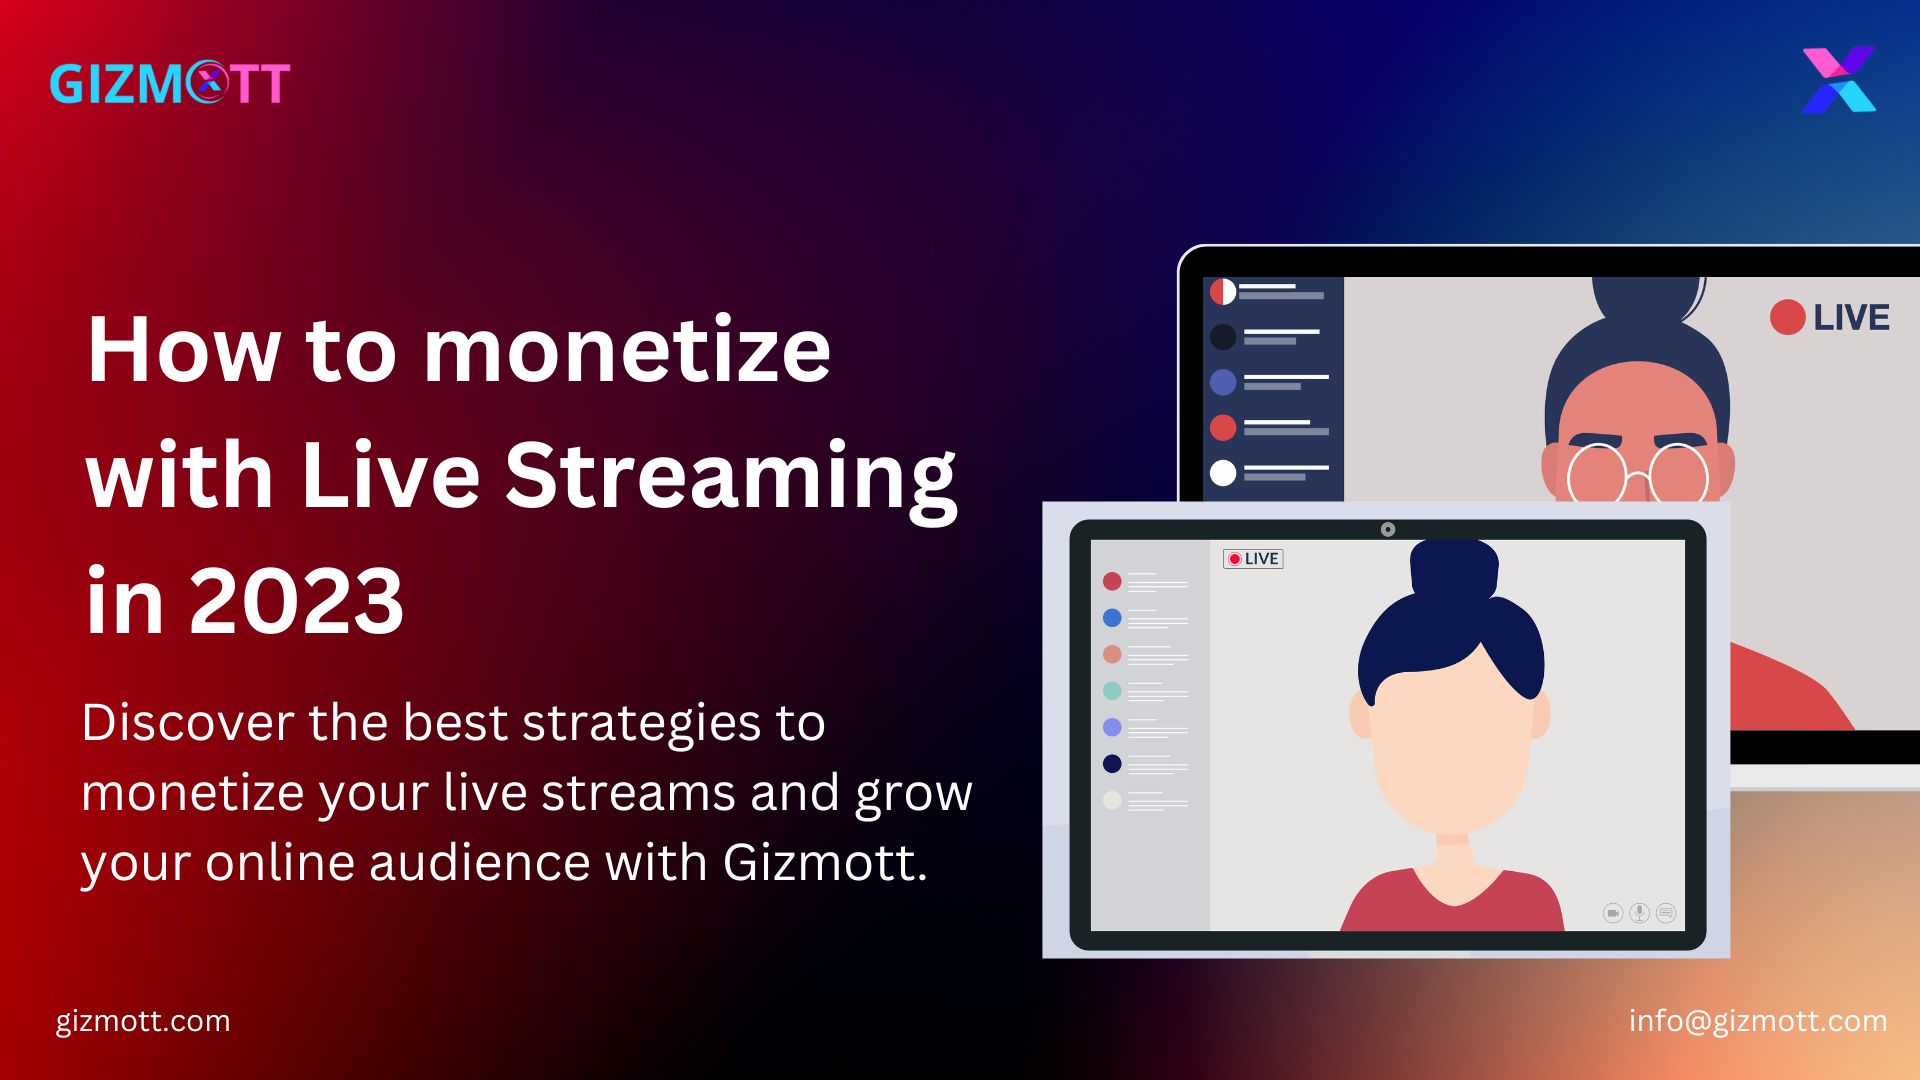 How to monetize with Live Streaming in 2023